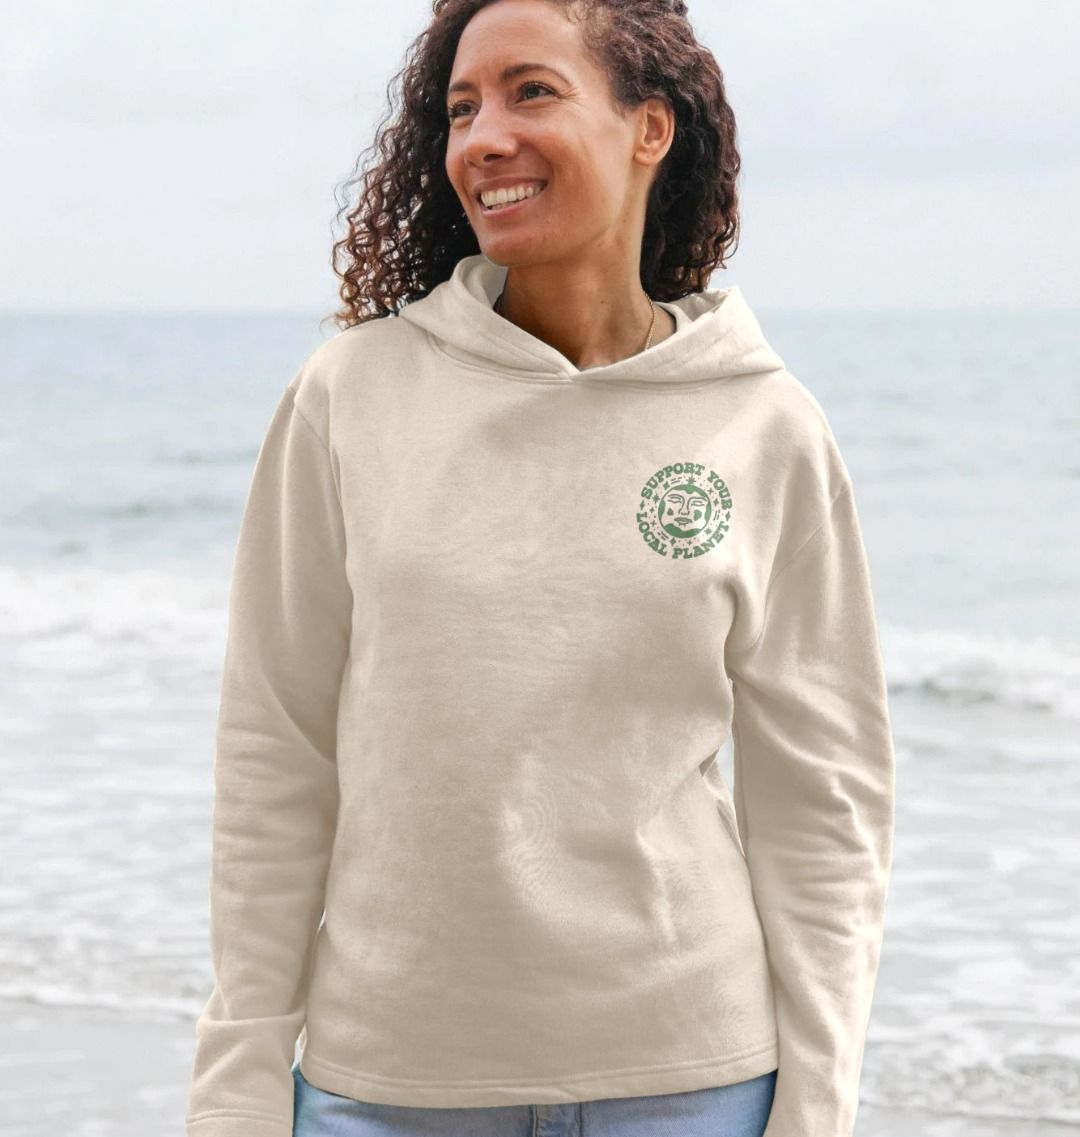 The Women's Support Your Local Planet hoodie - Printed Hoodies